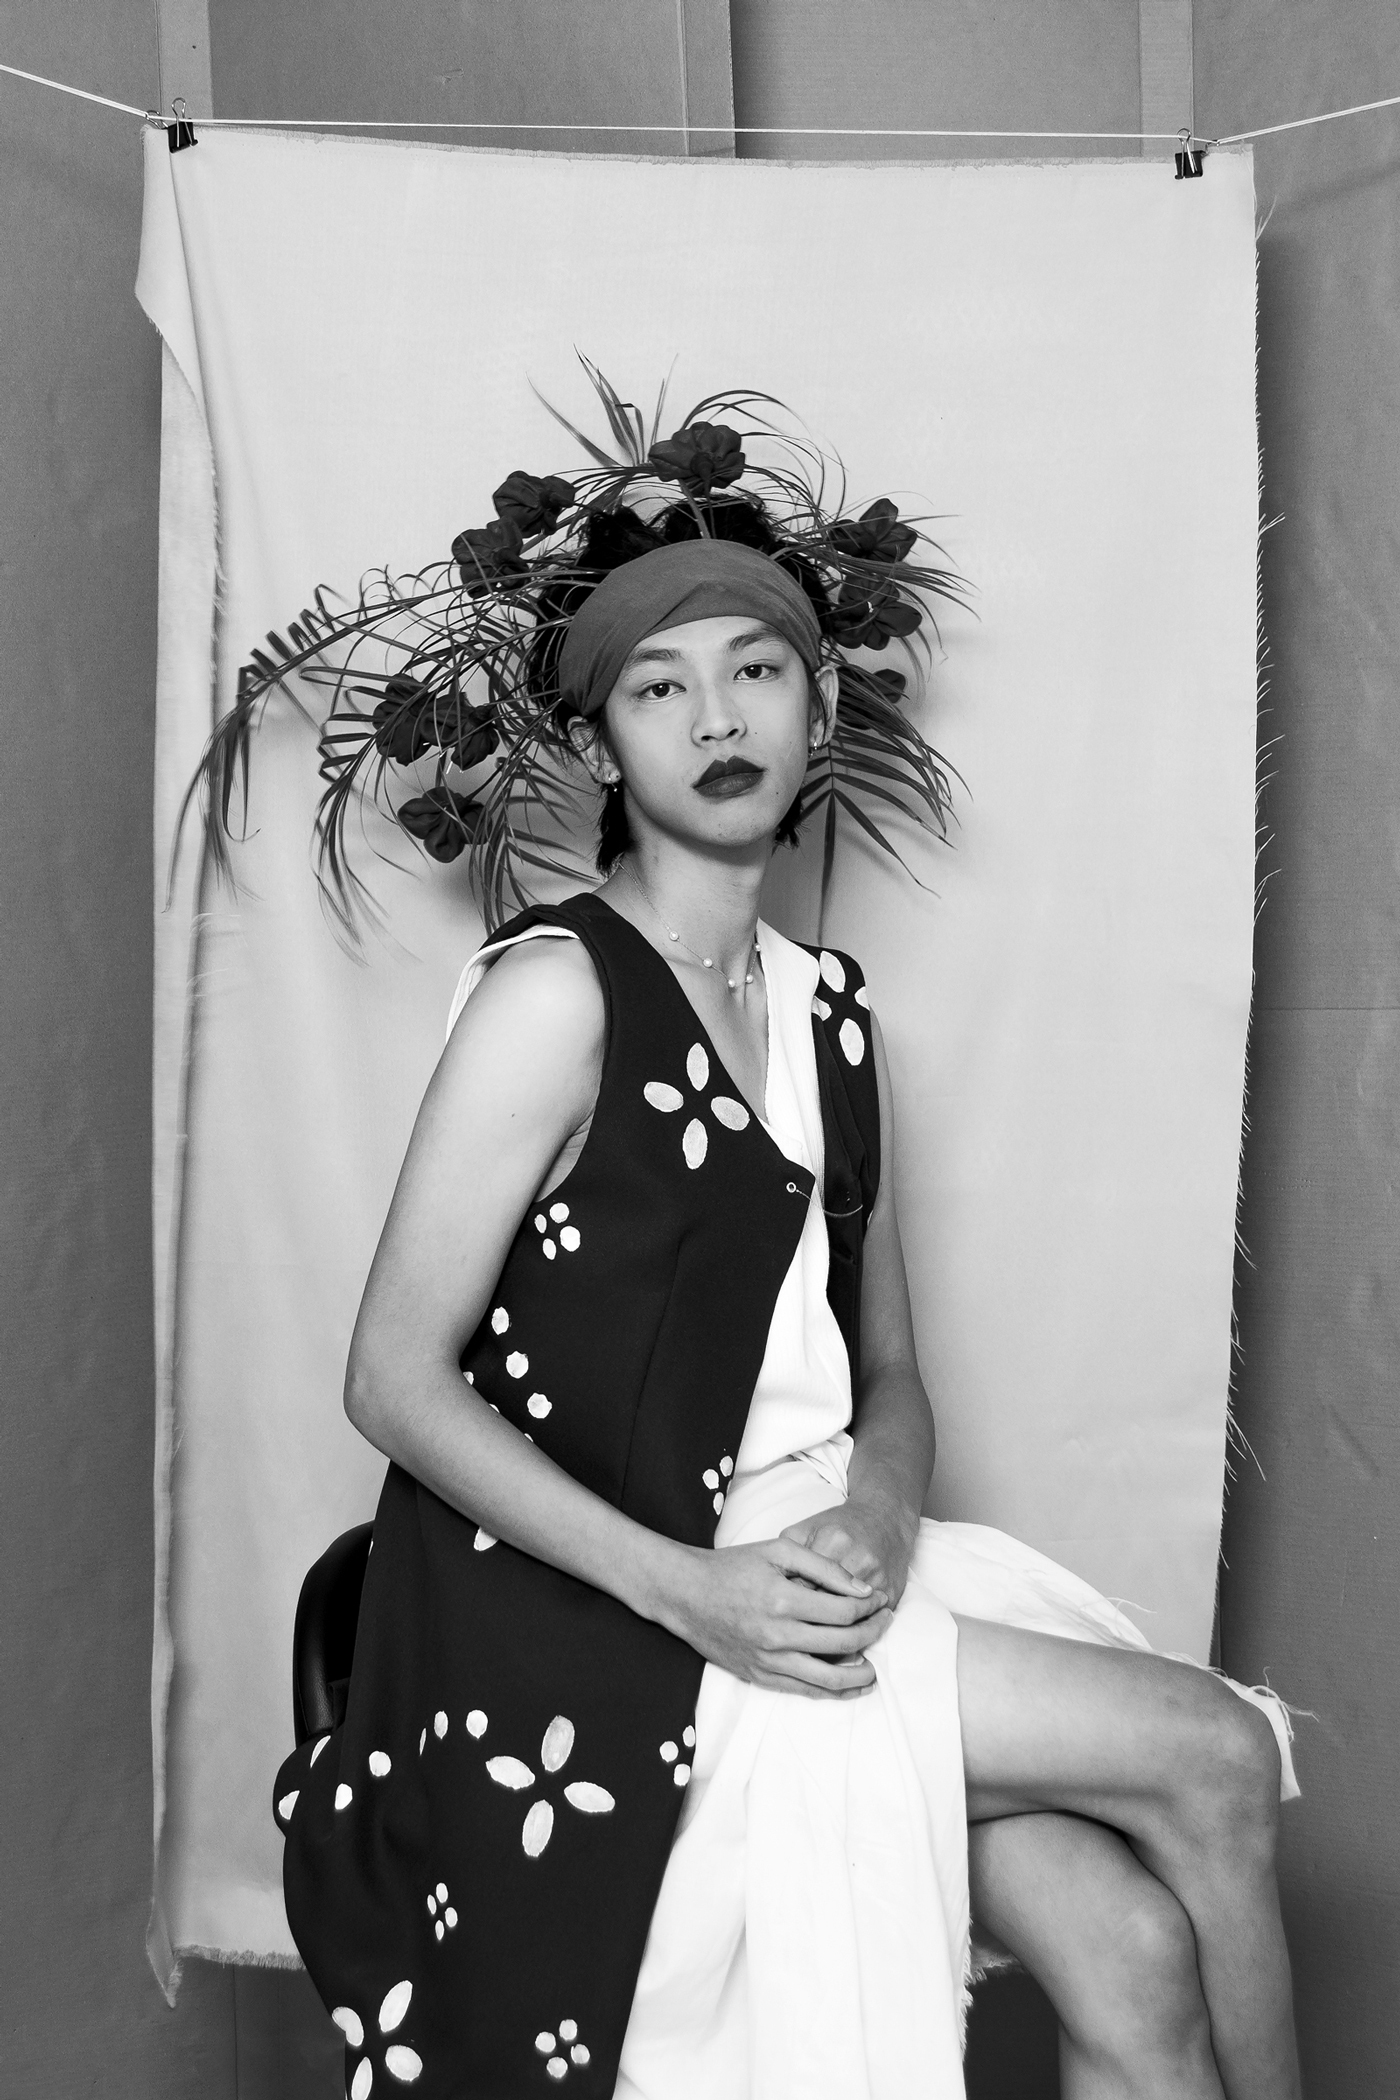 a seated figure photographed in black and white. They are wearing a headband with ferns and roses coming out of it.